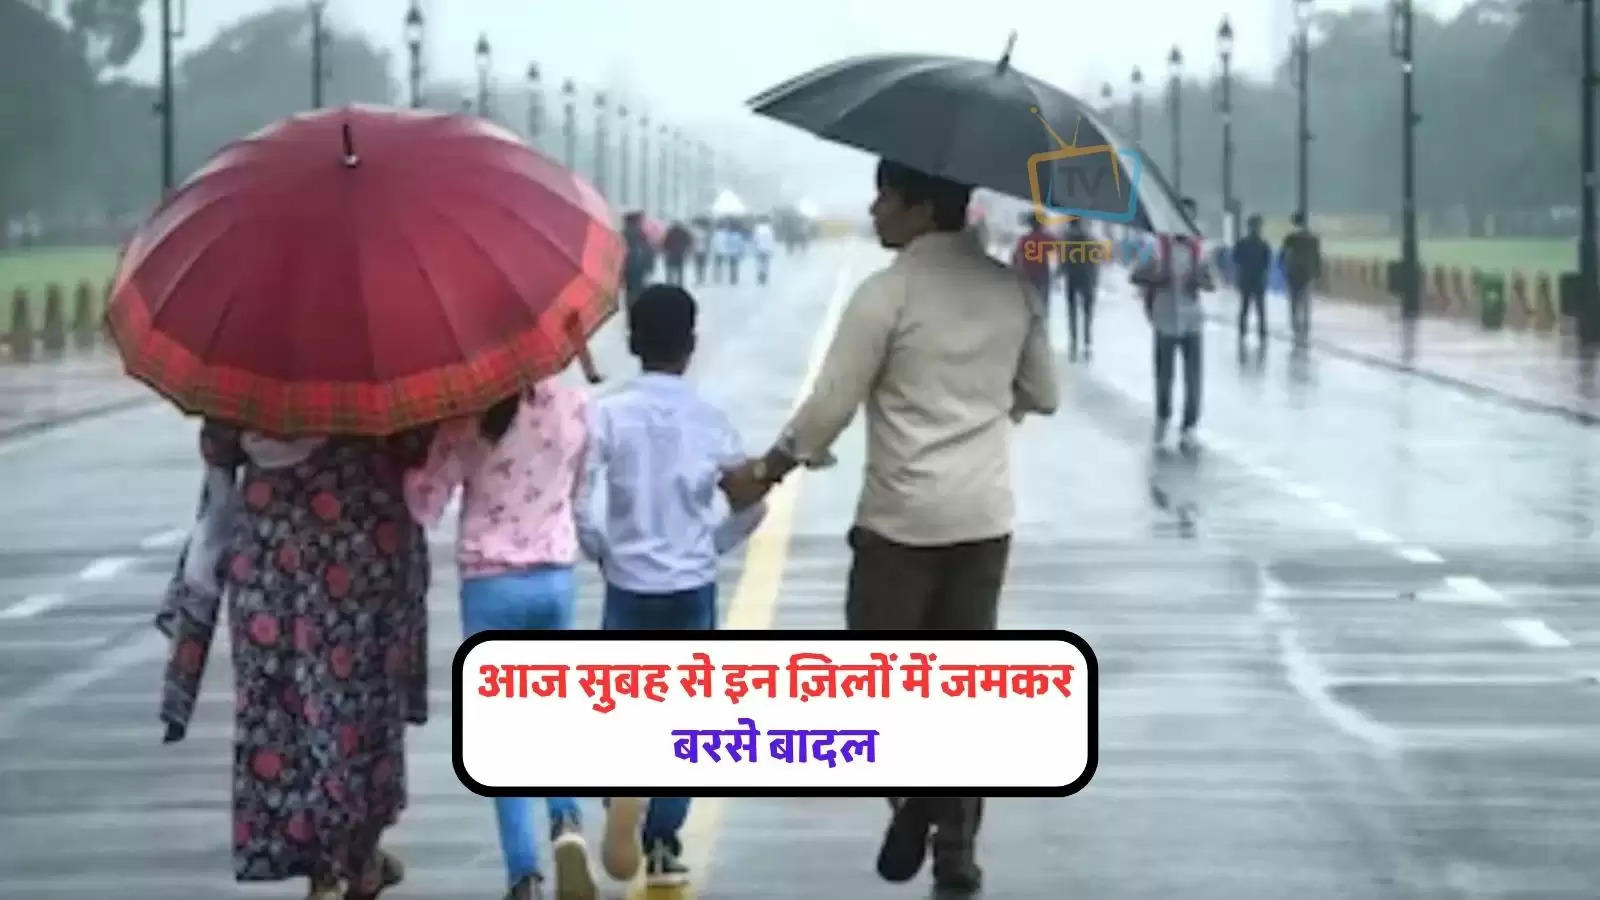 weather-update-today-it-rained-heavily-in-these-districts-of-haryana-the-meteorological-department-has-issued-a-yellow-alert-for-these-districts